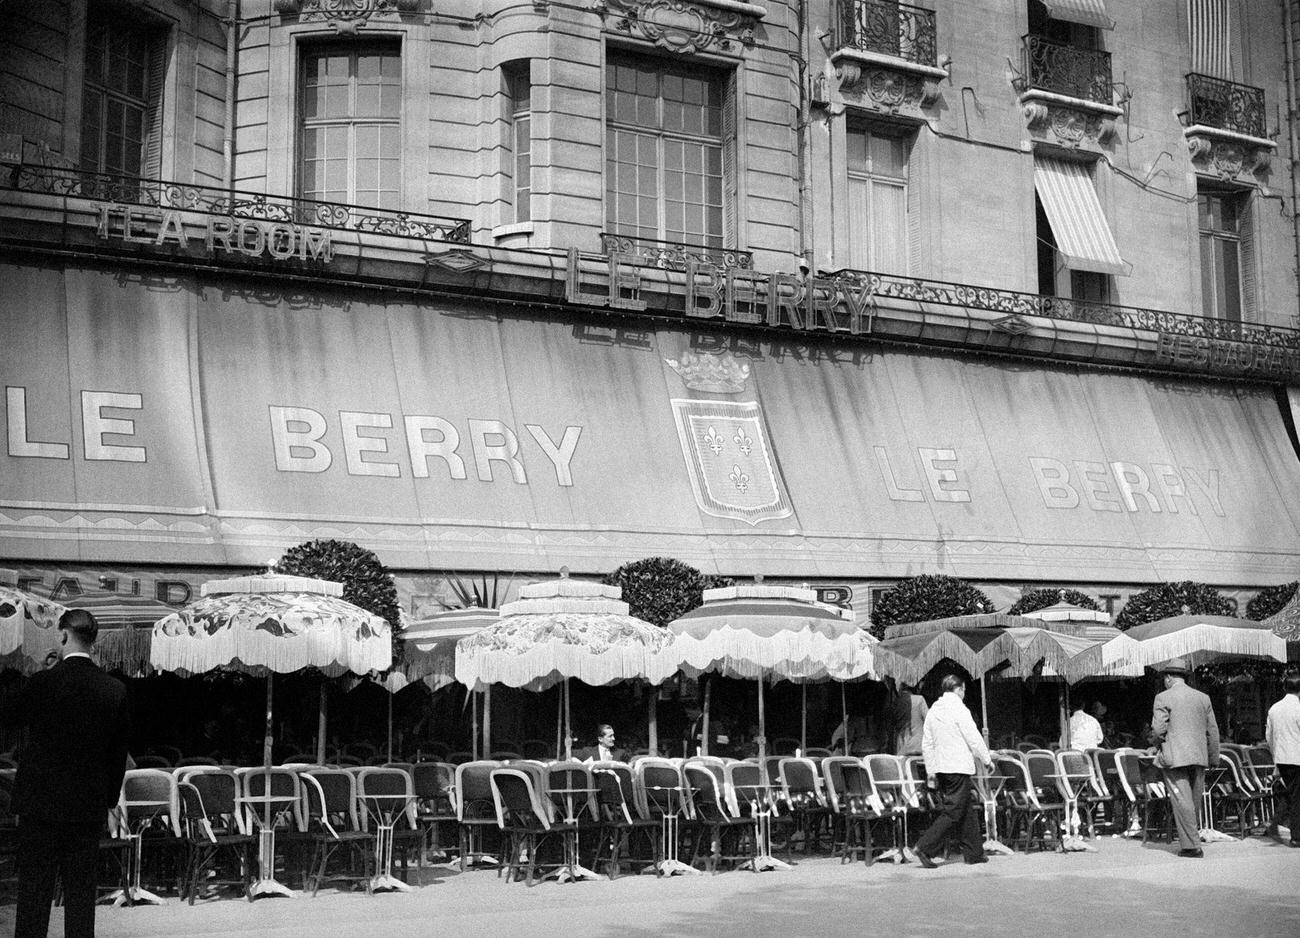 Exterior of 'Le Berry' Cafe in Paris, 1930